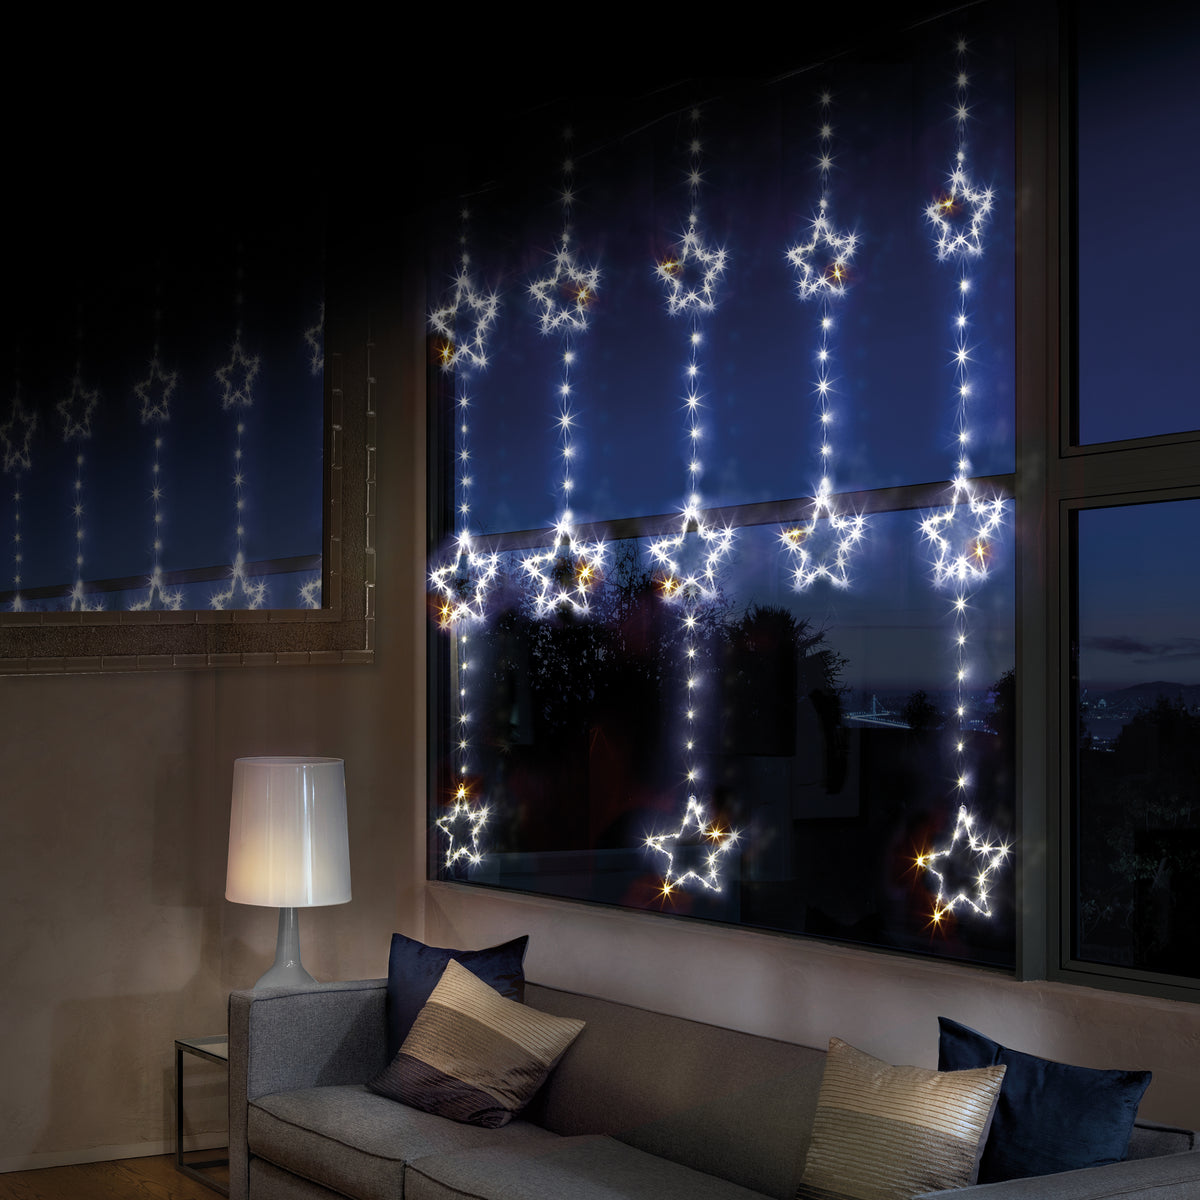 1.2m x 1.3m Star Window Curtain Light with 312 White LEDs